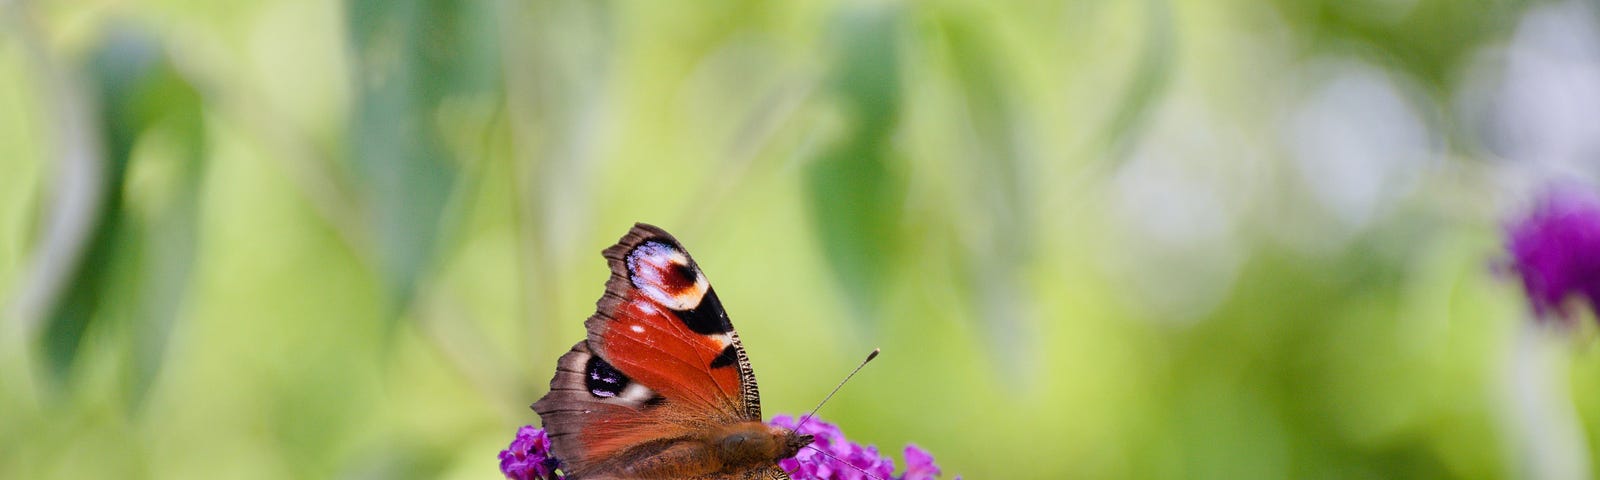 A peacock butterfly feeding on a purple buddleia flower against a background of muted green leaves